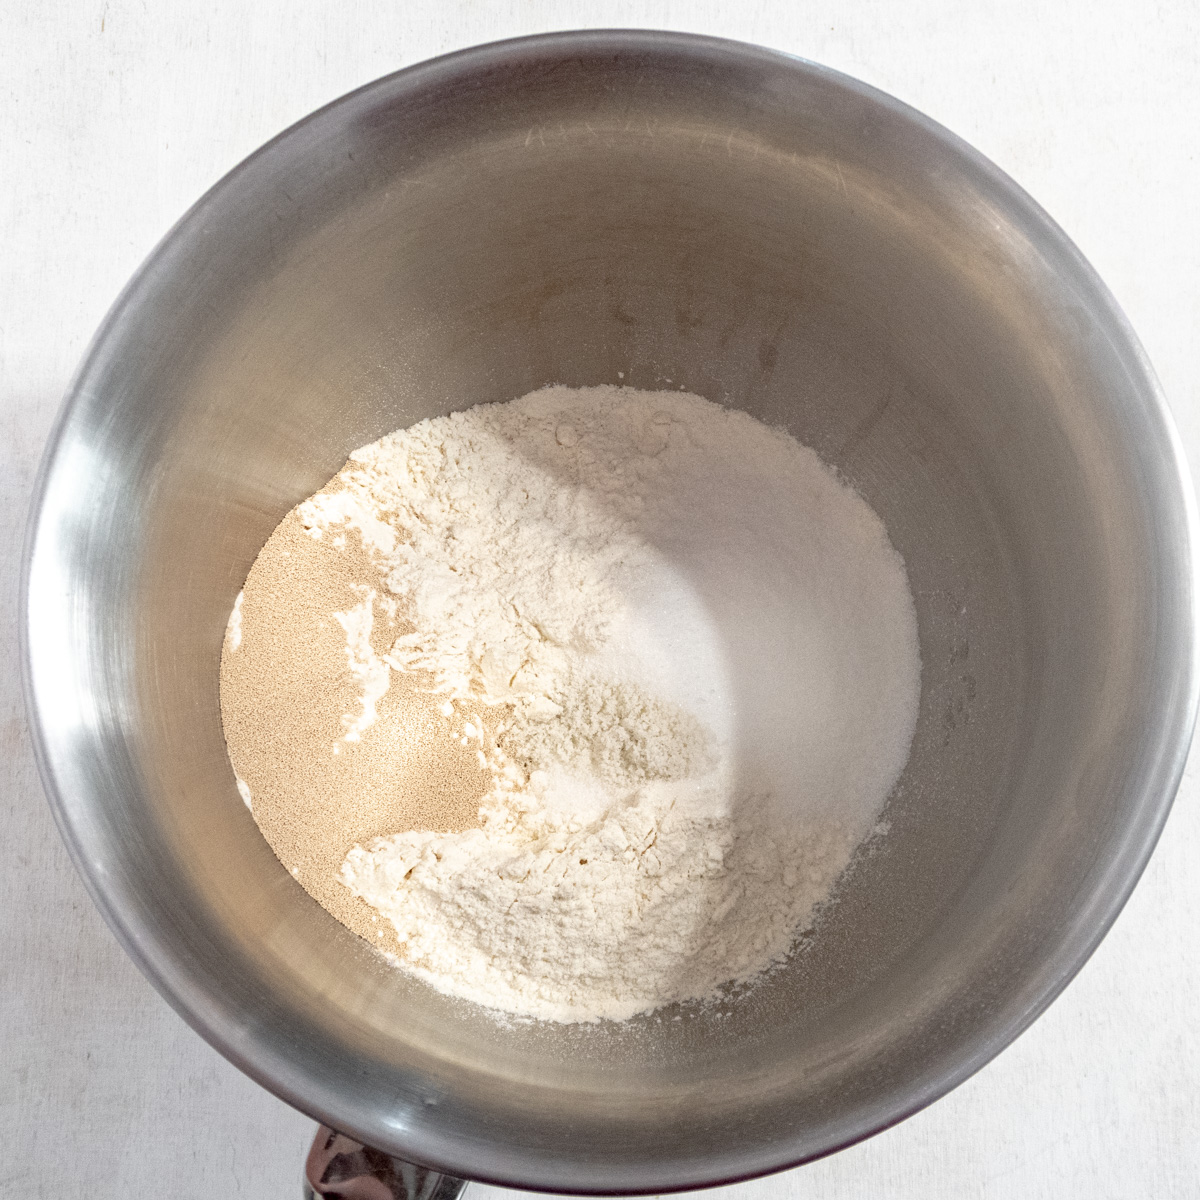 Dry ingredients for the dough in the bowl of a stand mixer